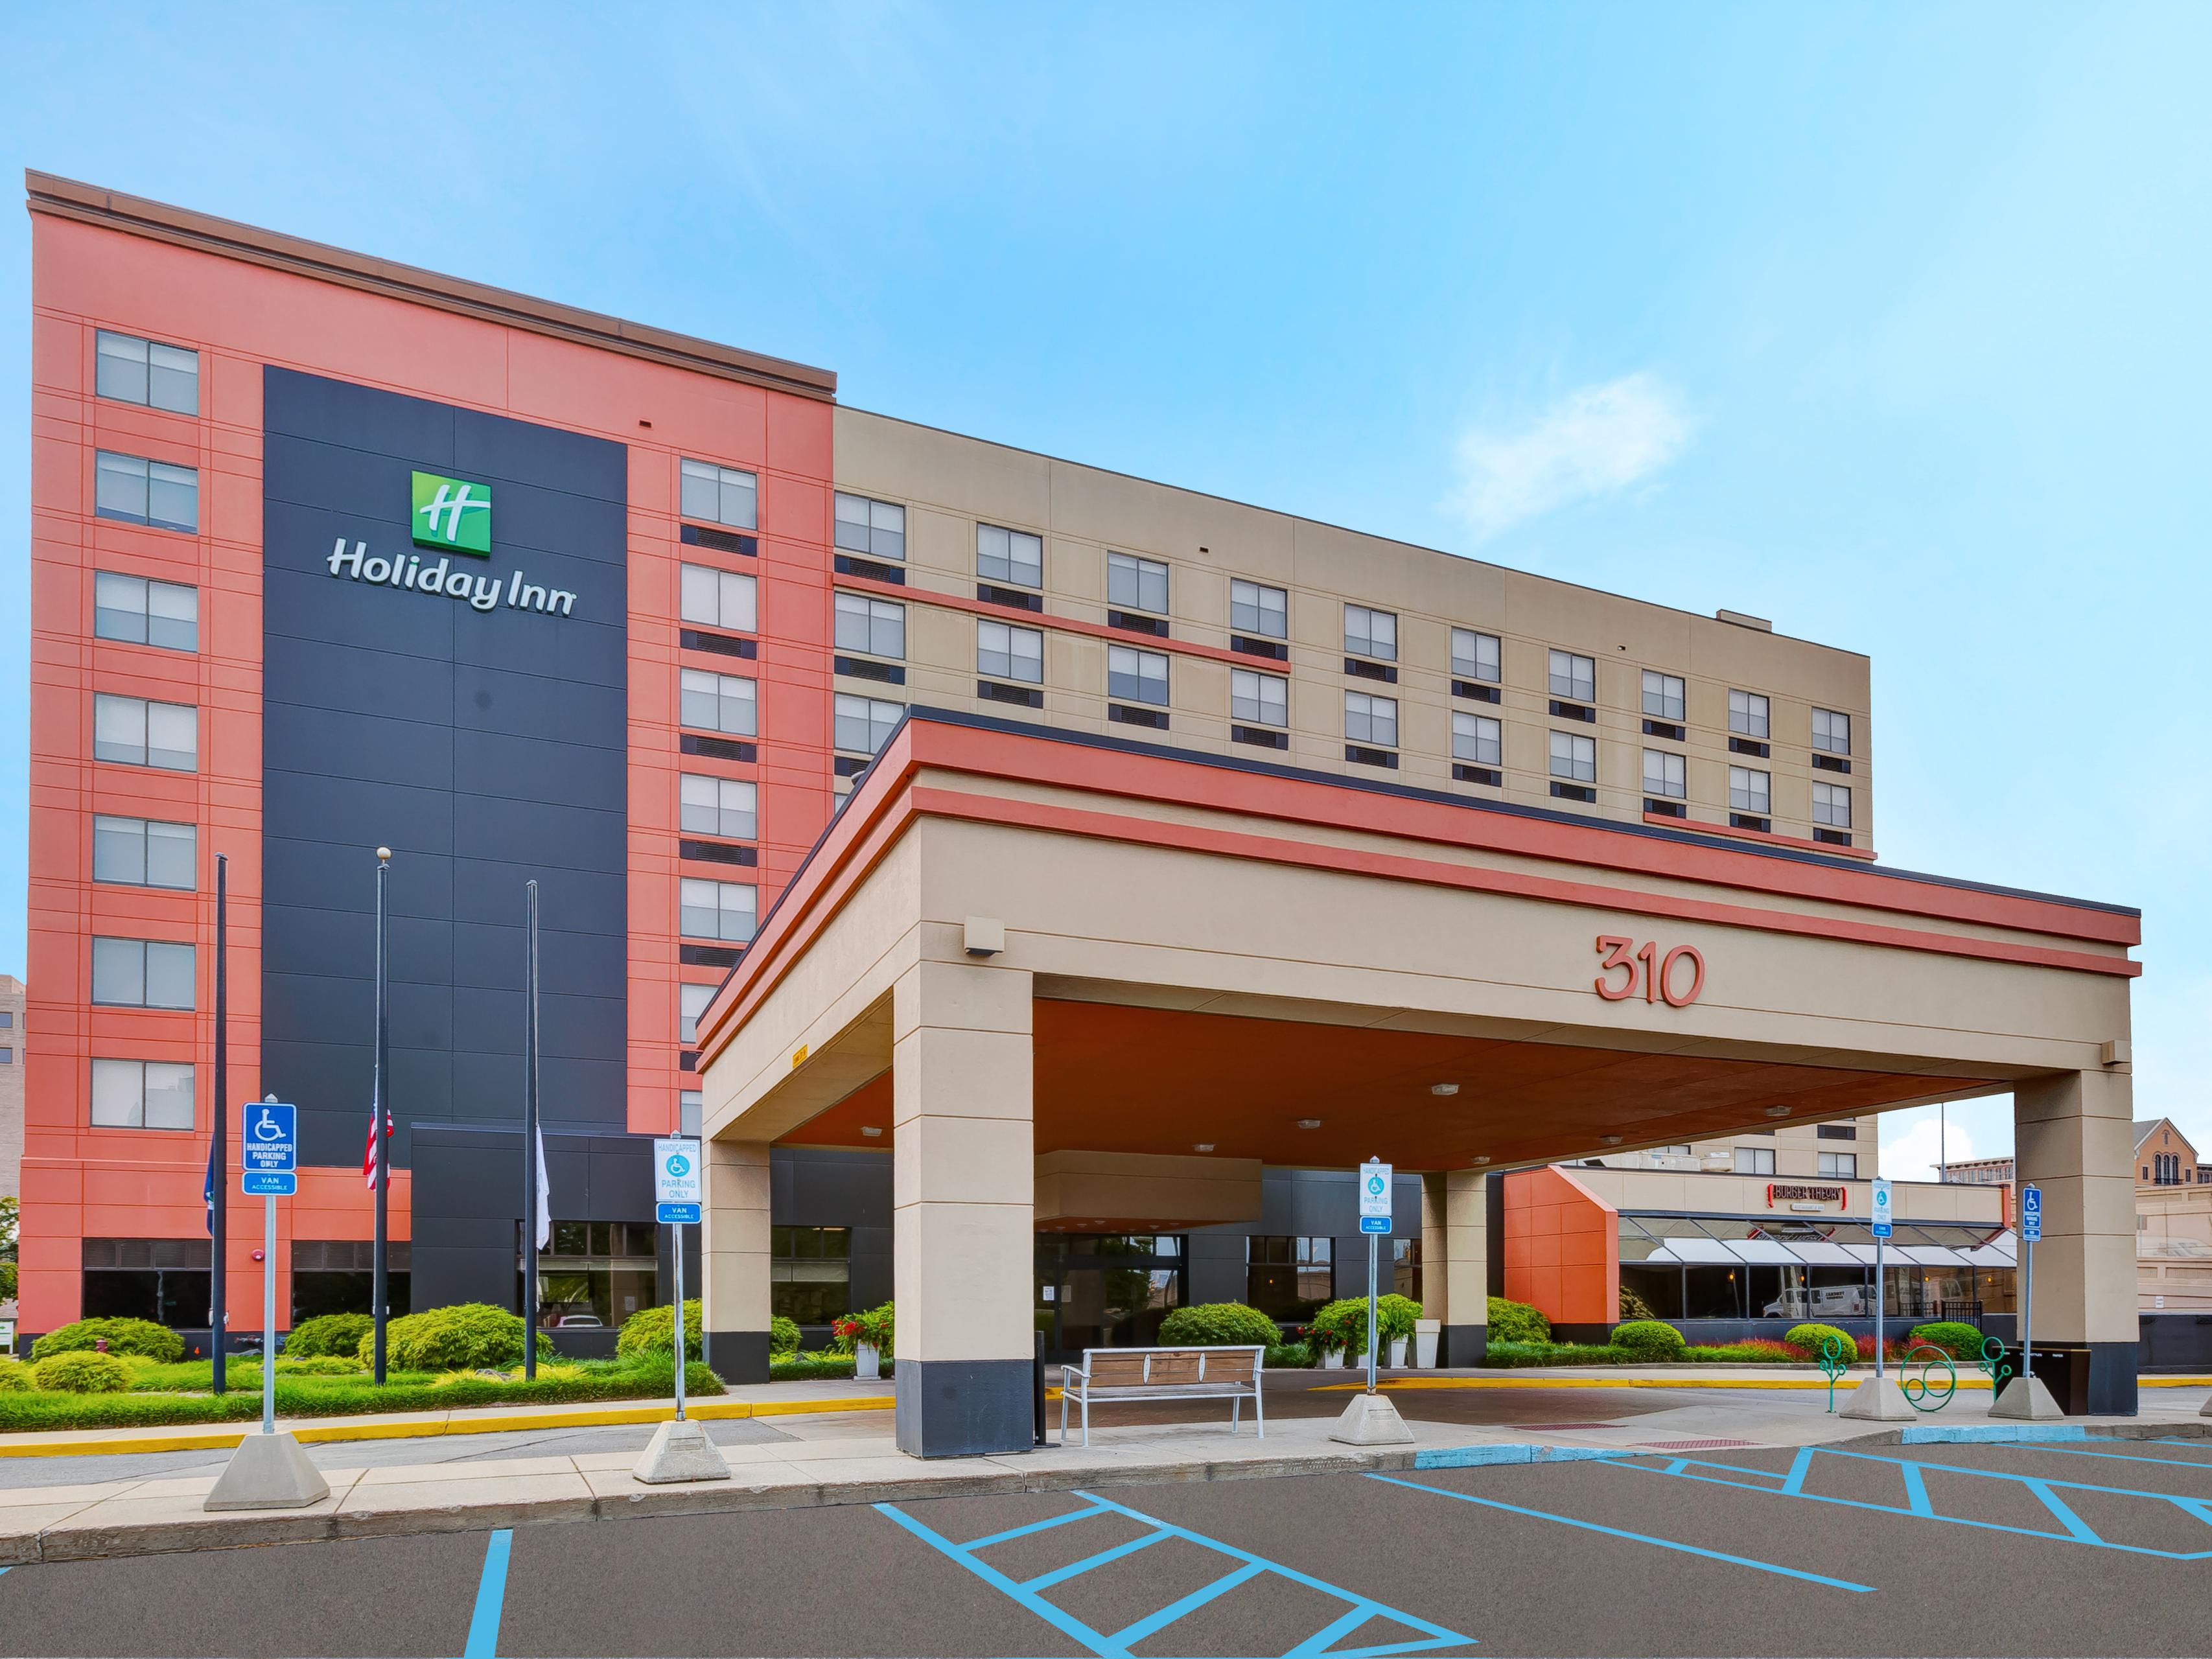 Our guests enjoy complimentary self-parking in our hotel lot, a value of over $25.00 per day. As the only downtown Grand Rapids hotel to provide this exclusive benefit, we minimize your stress and maximize your comfort. Say goodbye to parking fees and hello to a hassle-free stay.